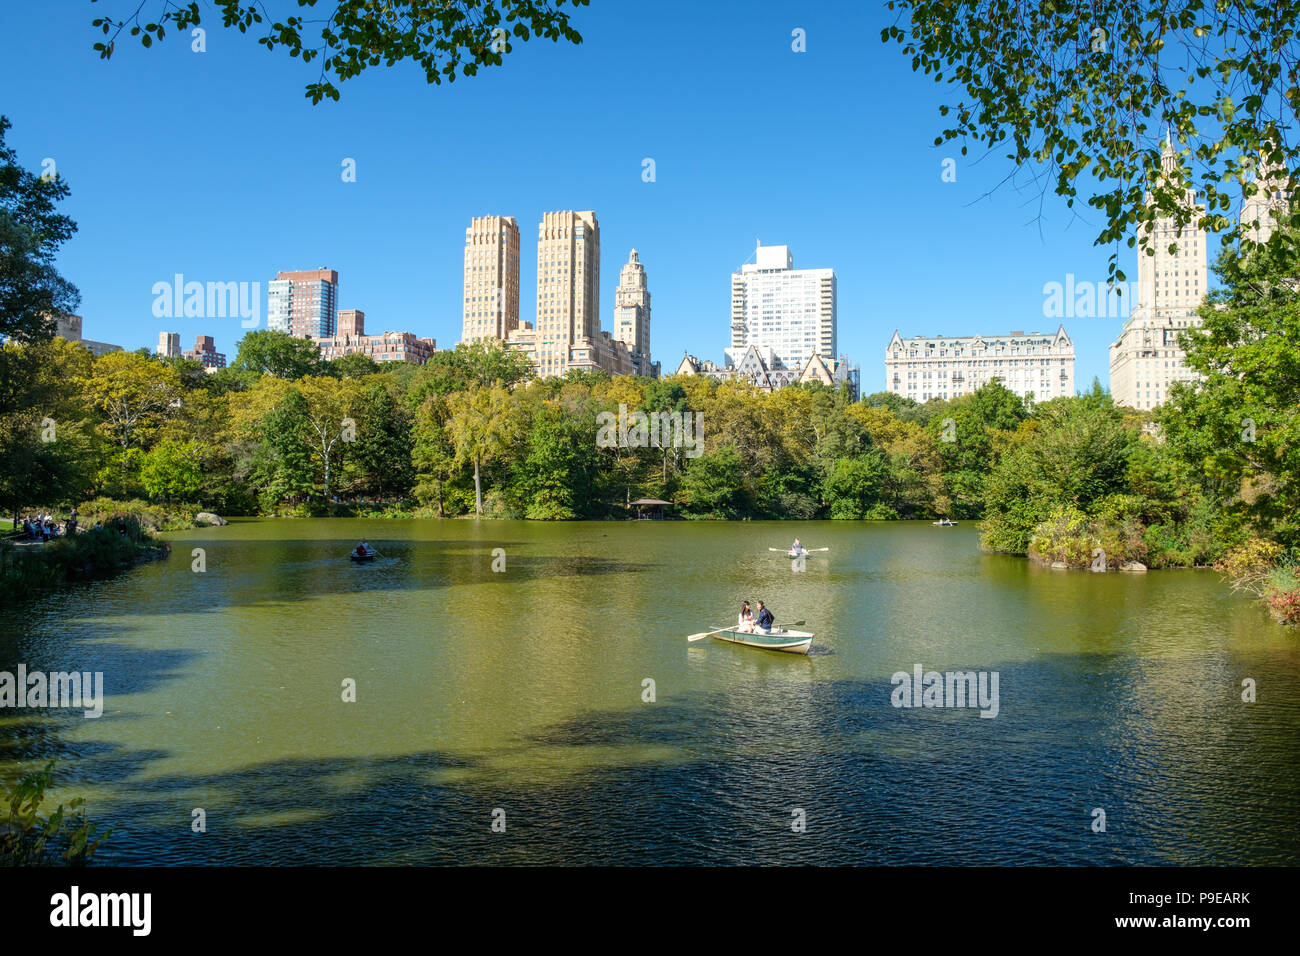 Views of the boating lake in Central Park New York Stock Photo